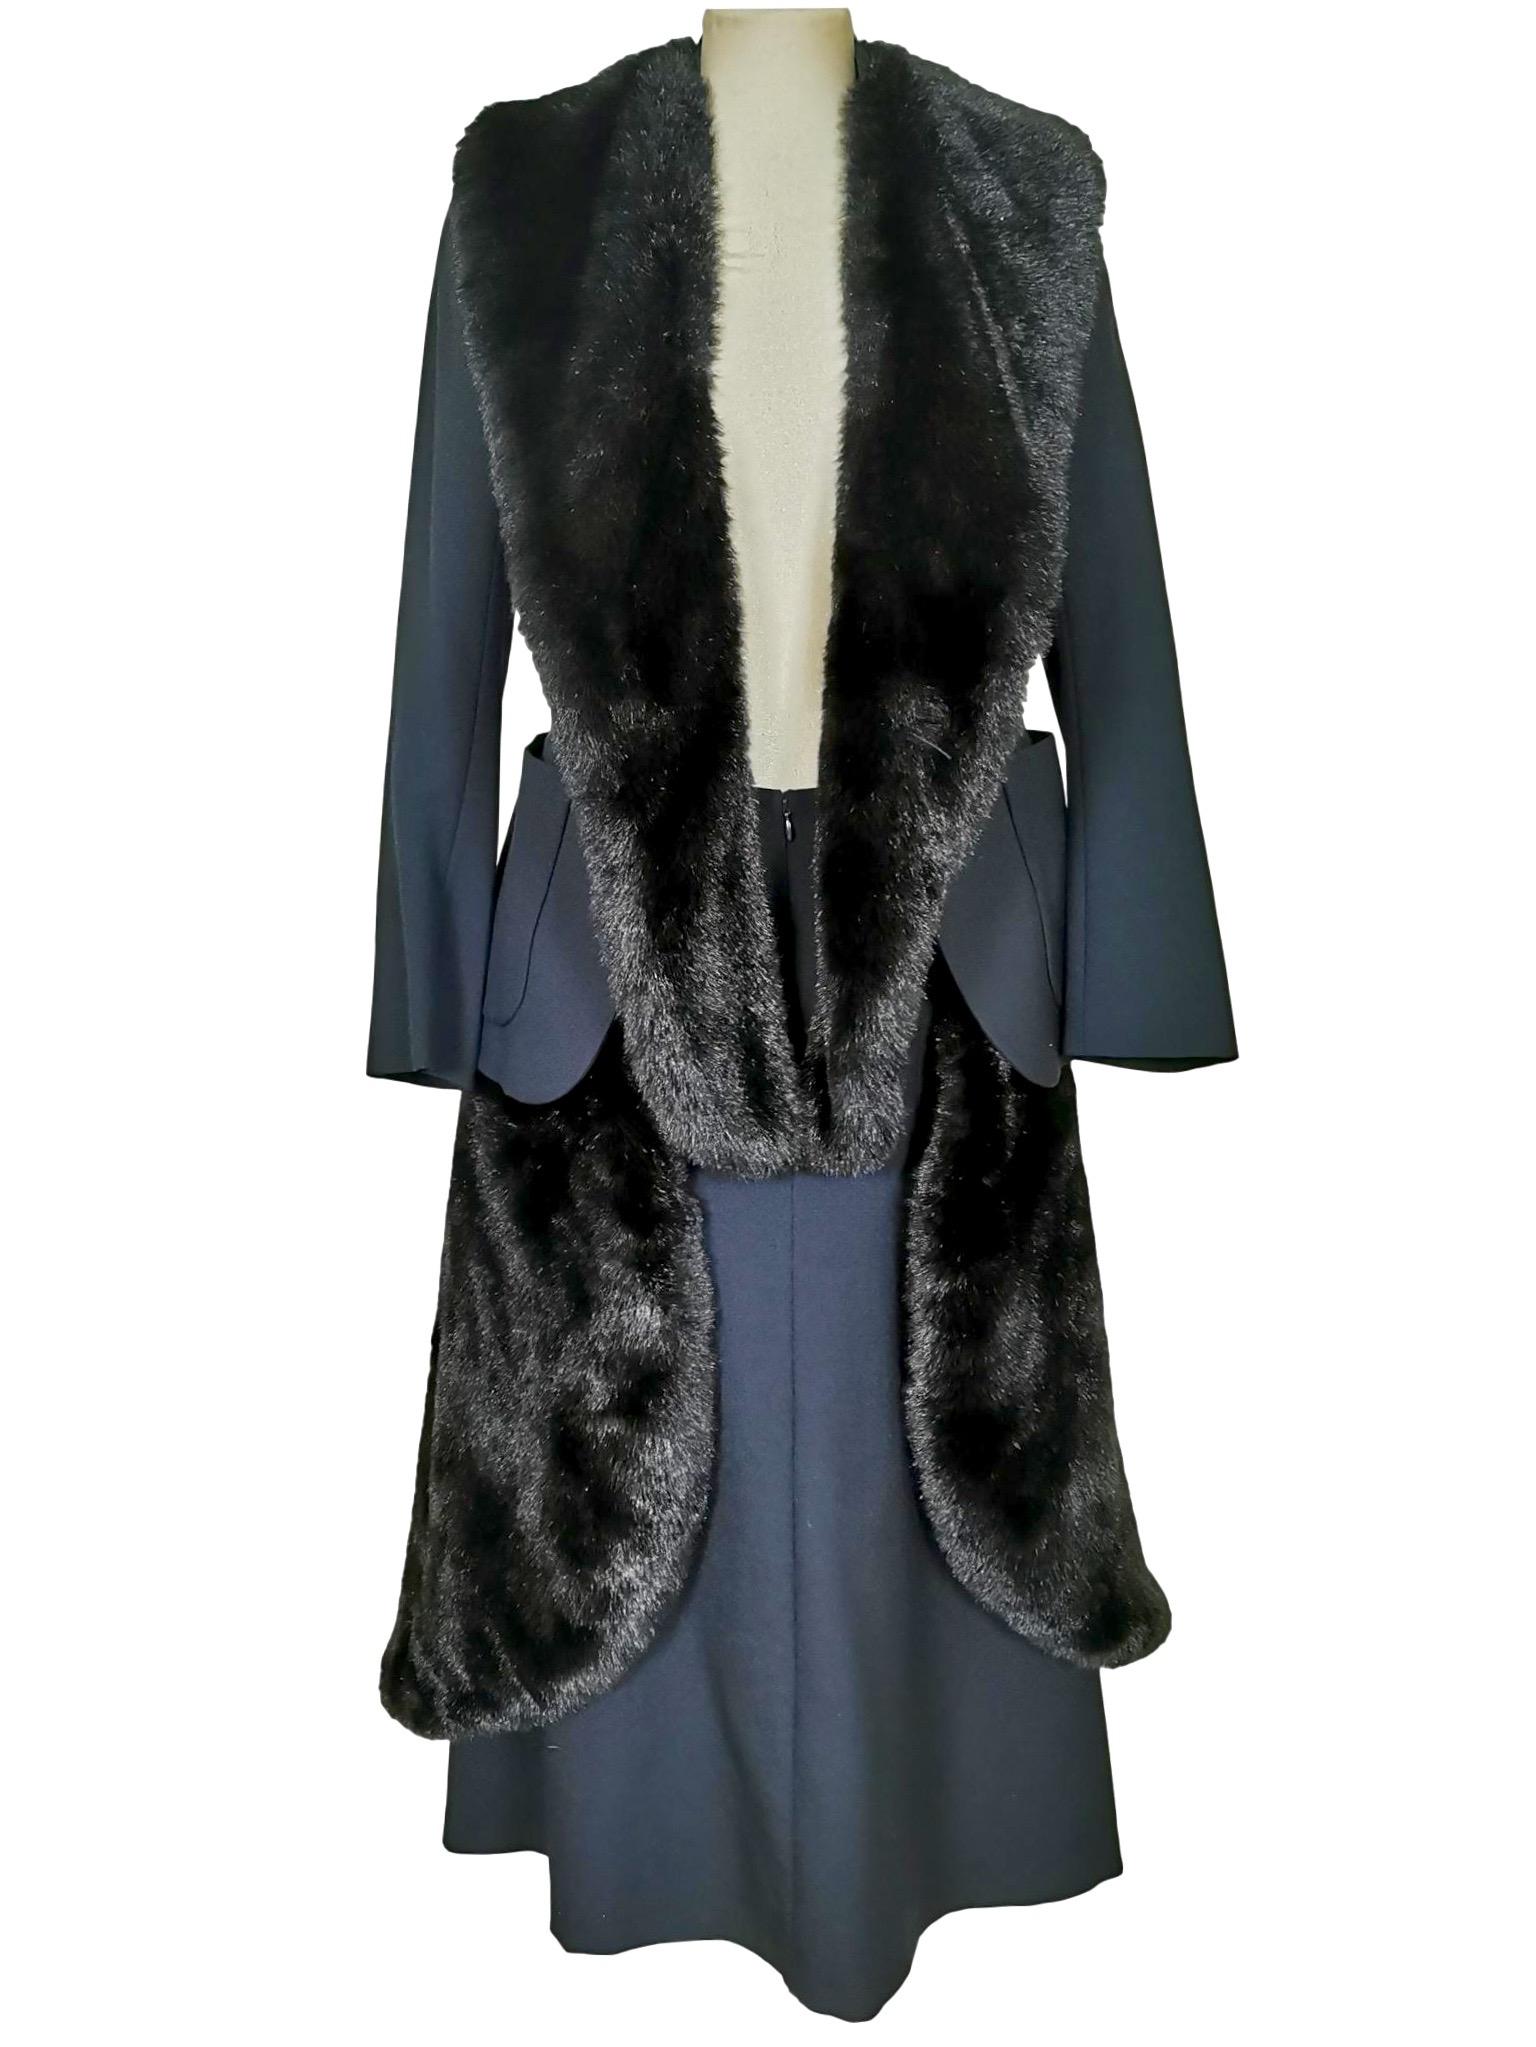 CDG Junya Watanabe 50s Inspired Skirt Suit Detachable Faux Fur Collar In Excellent Condition For Sale In Bath, GB